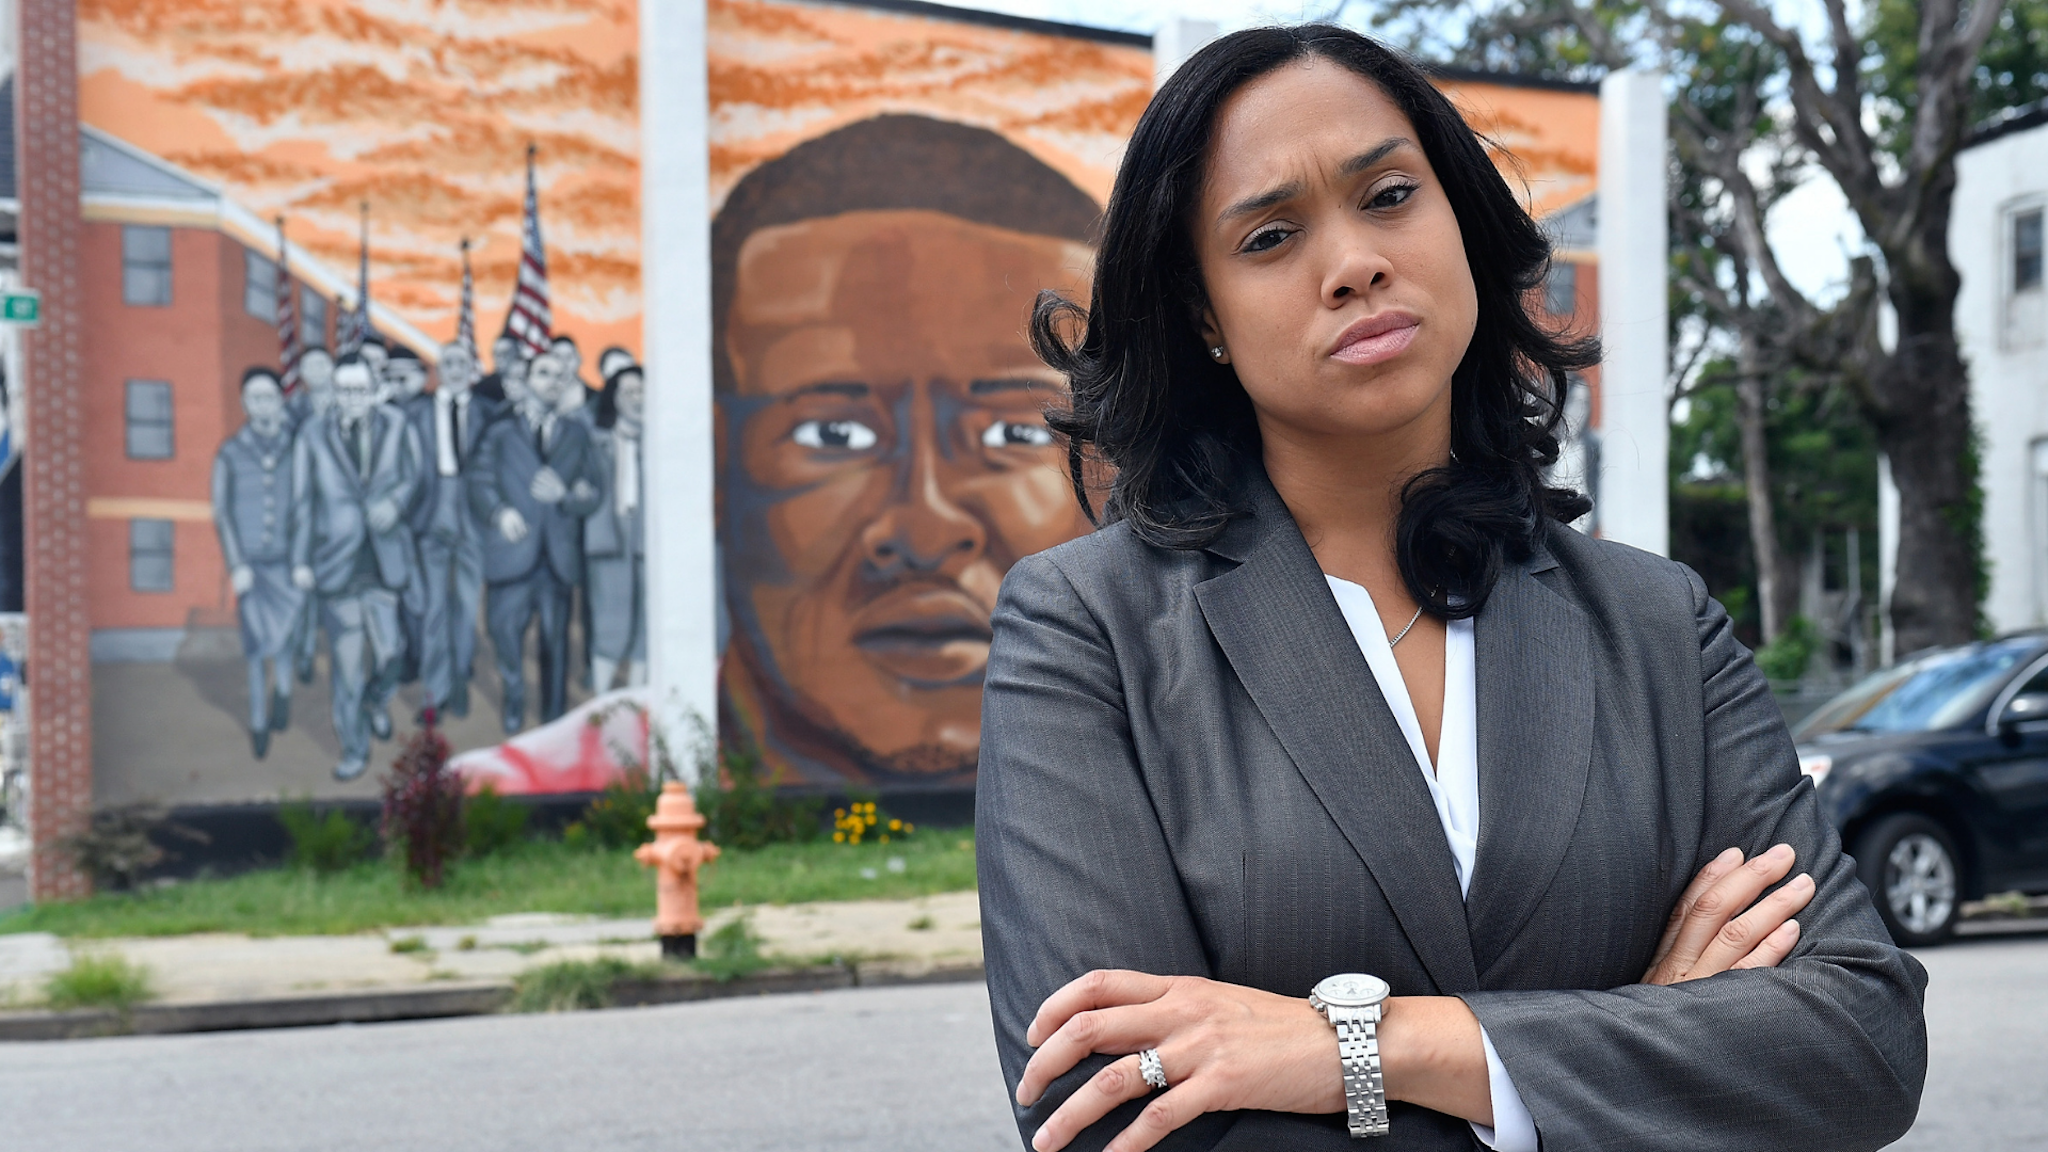 BALTIMORE, MD - AUGUST 24: State's Attorney for Baltimore, Maryland, Marilyn J. Mosby is interviewed by Shoshana Guy, Senior Producer NBC News (not pictured) while walking through the Sandtown-Winchester neighborhood, where Freddie Gray was arrested, on August 24, 2016 in Baltimore, Maryland.